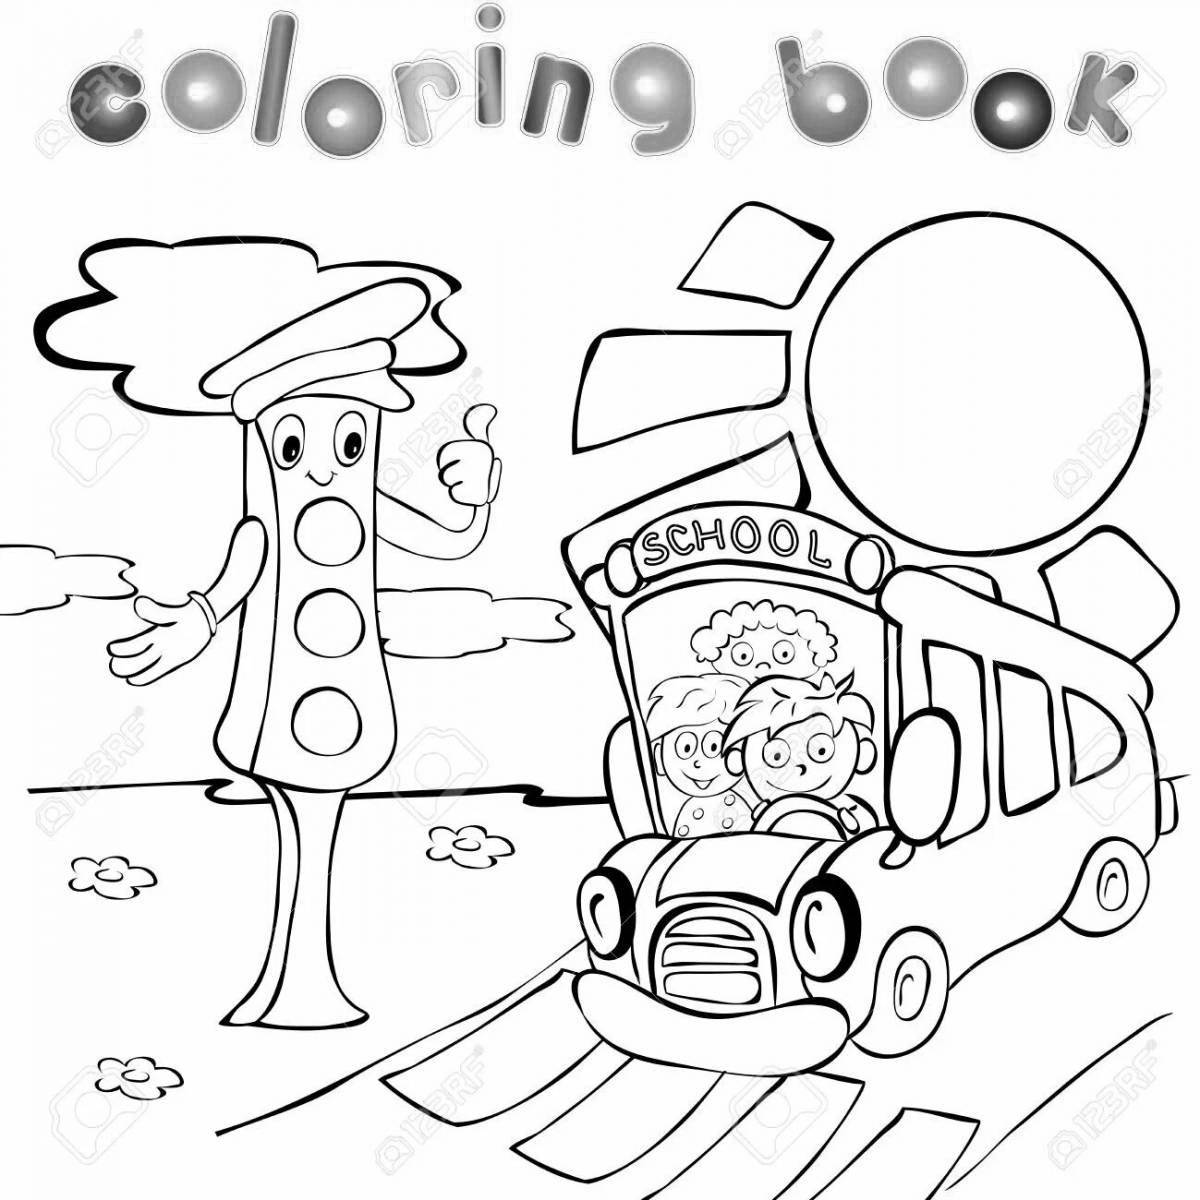 Charming coloring my friend traffic light